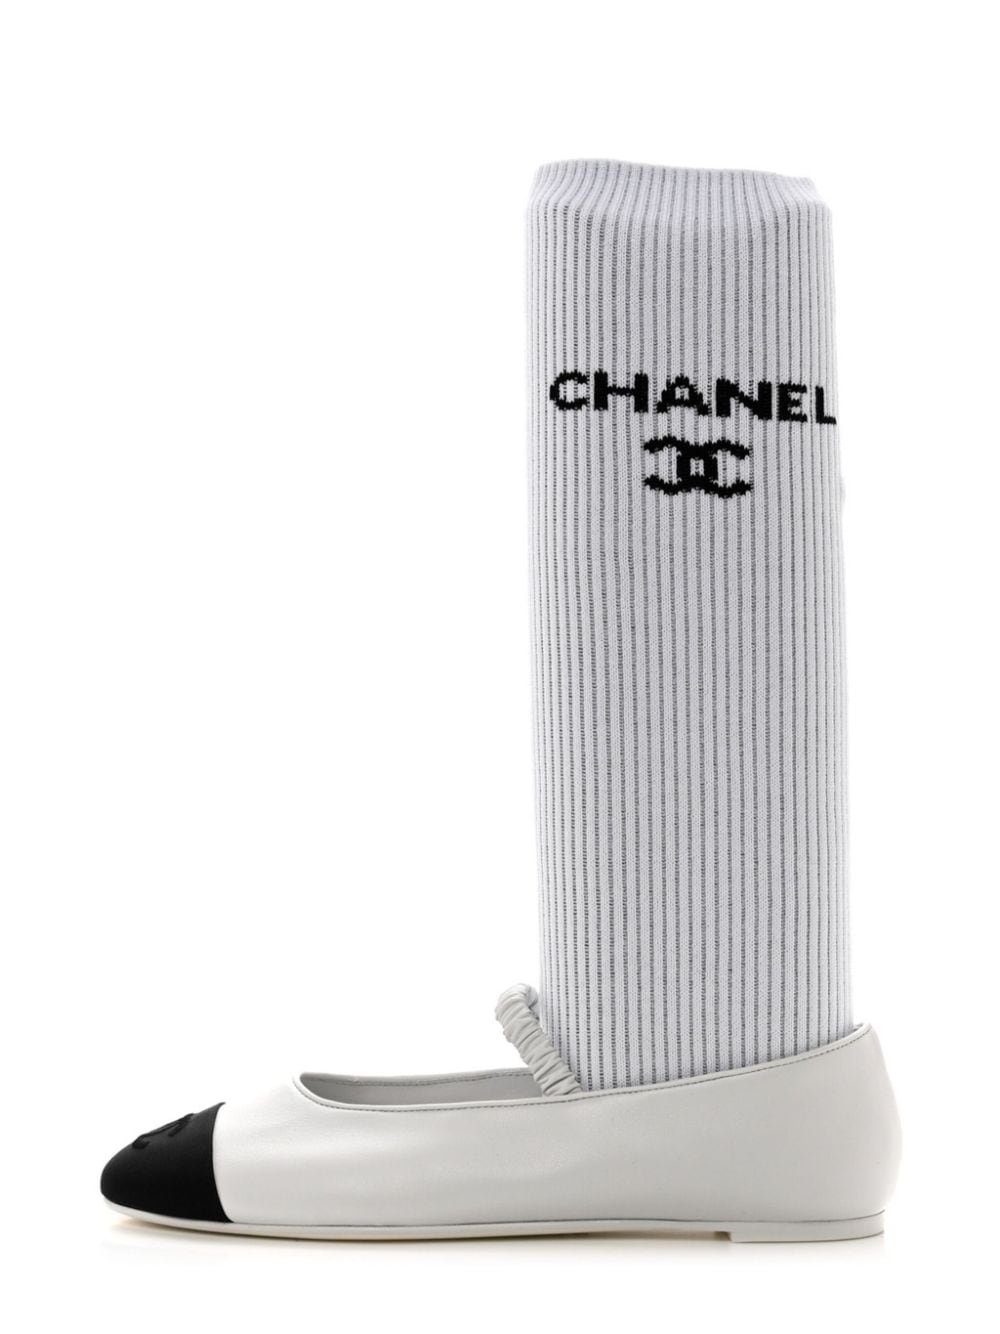 CHANEL Pre-Owned leg-warmer leather ballerina shoes - White